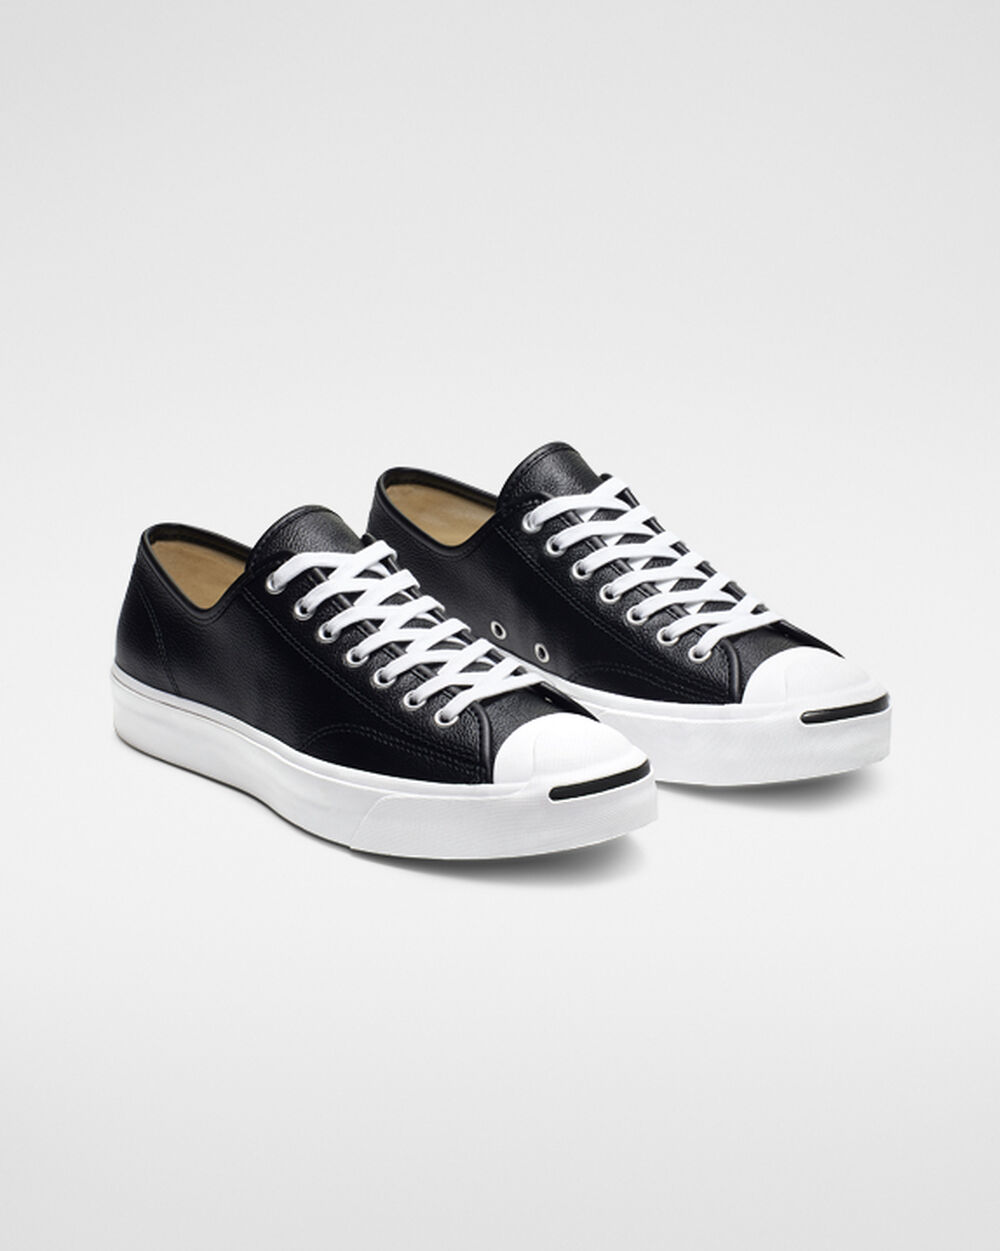 Tenis Converse Jack Purcell Mujer Negros Blancos | Mexico-37026